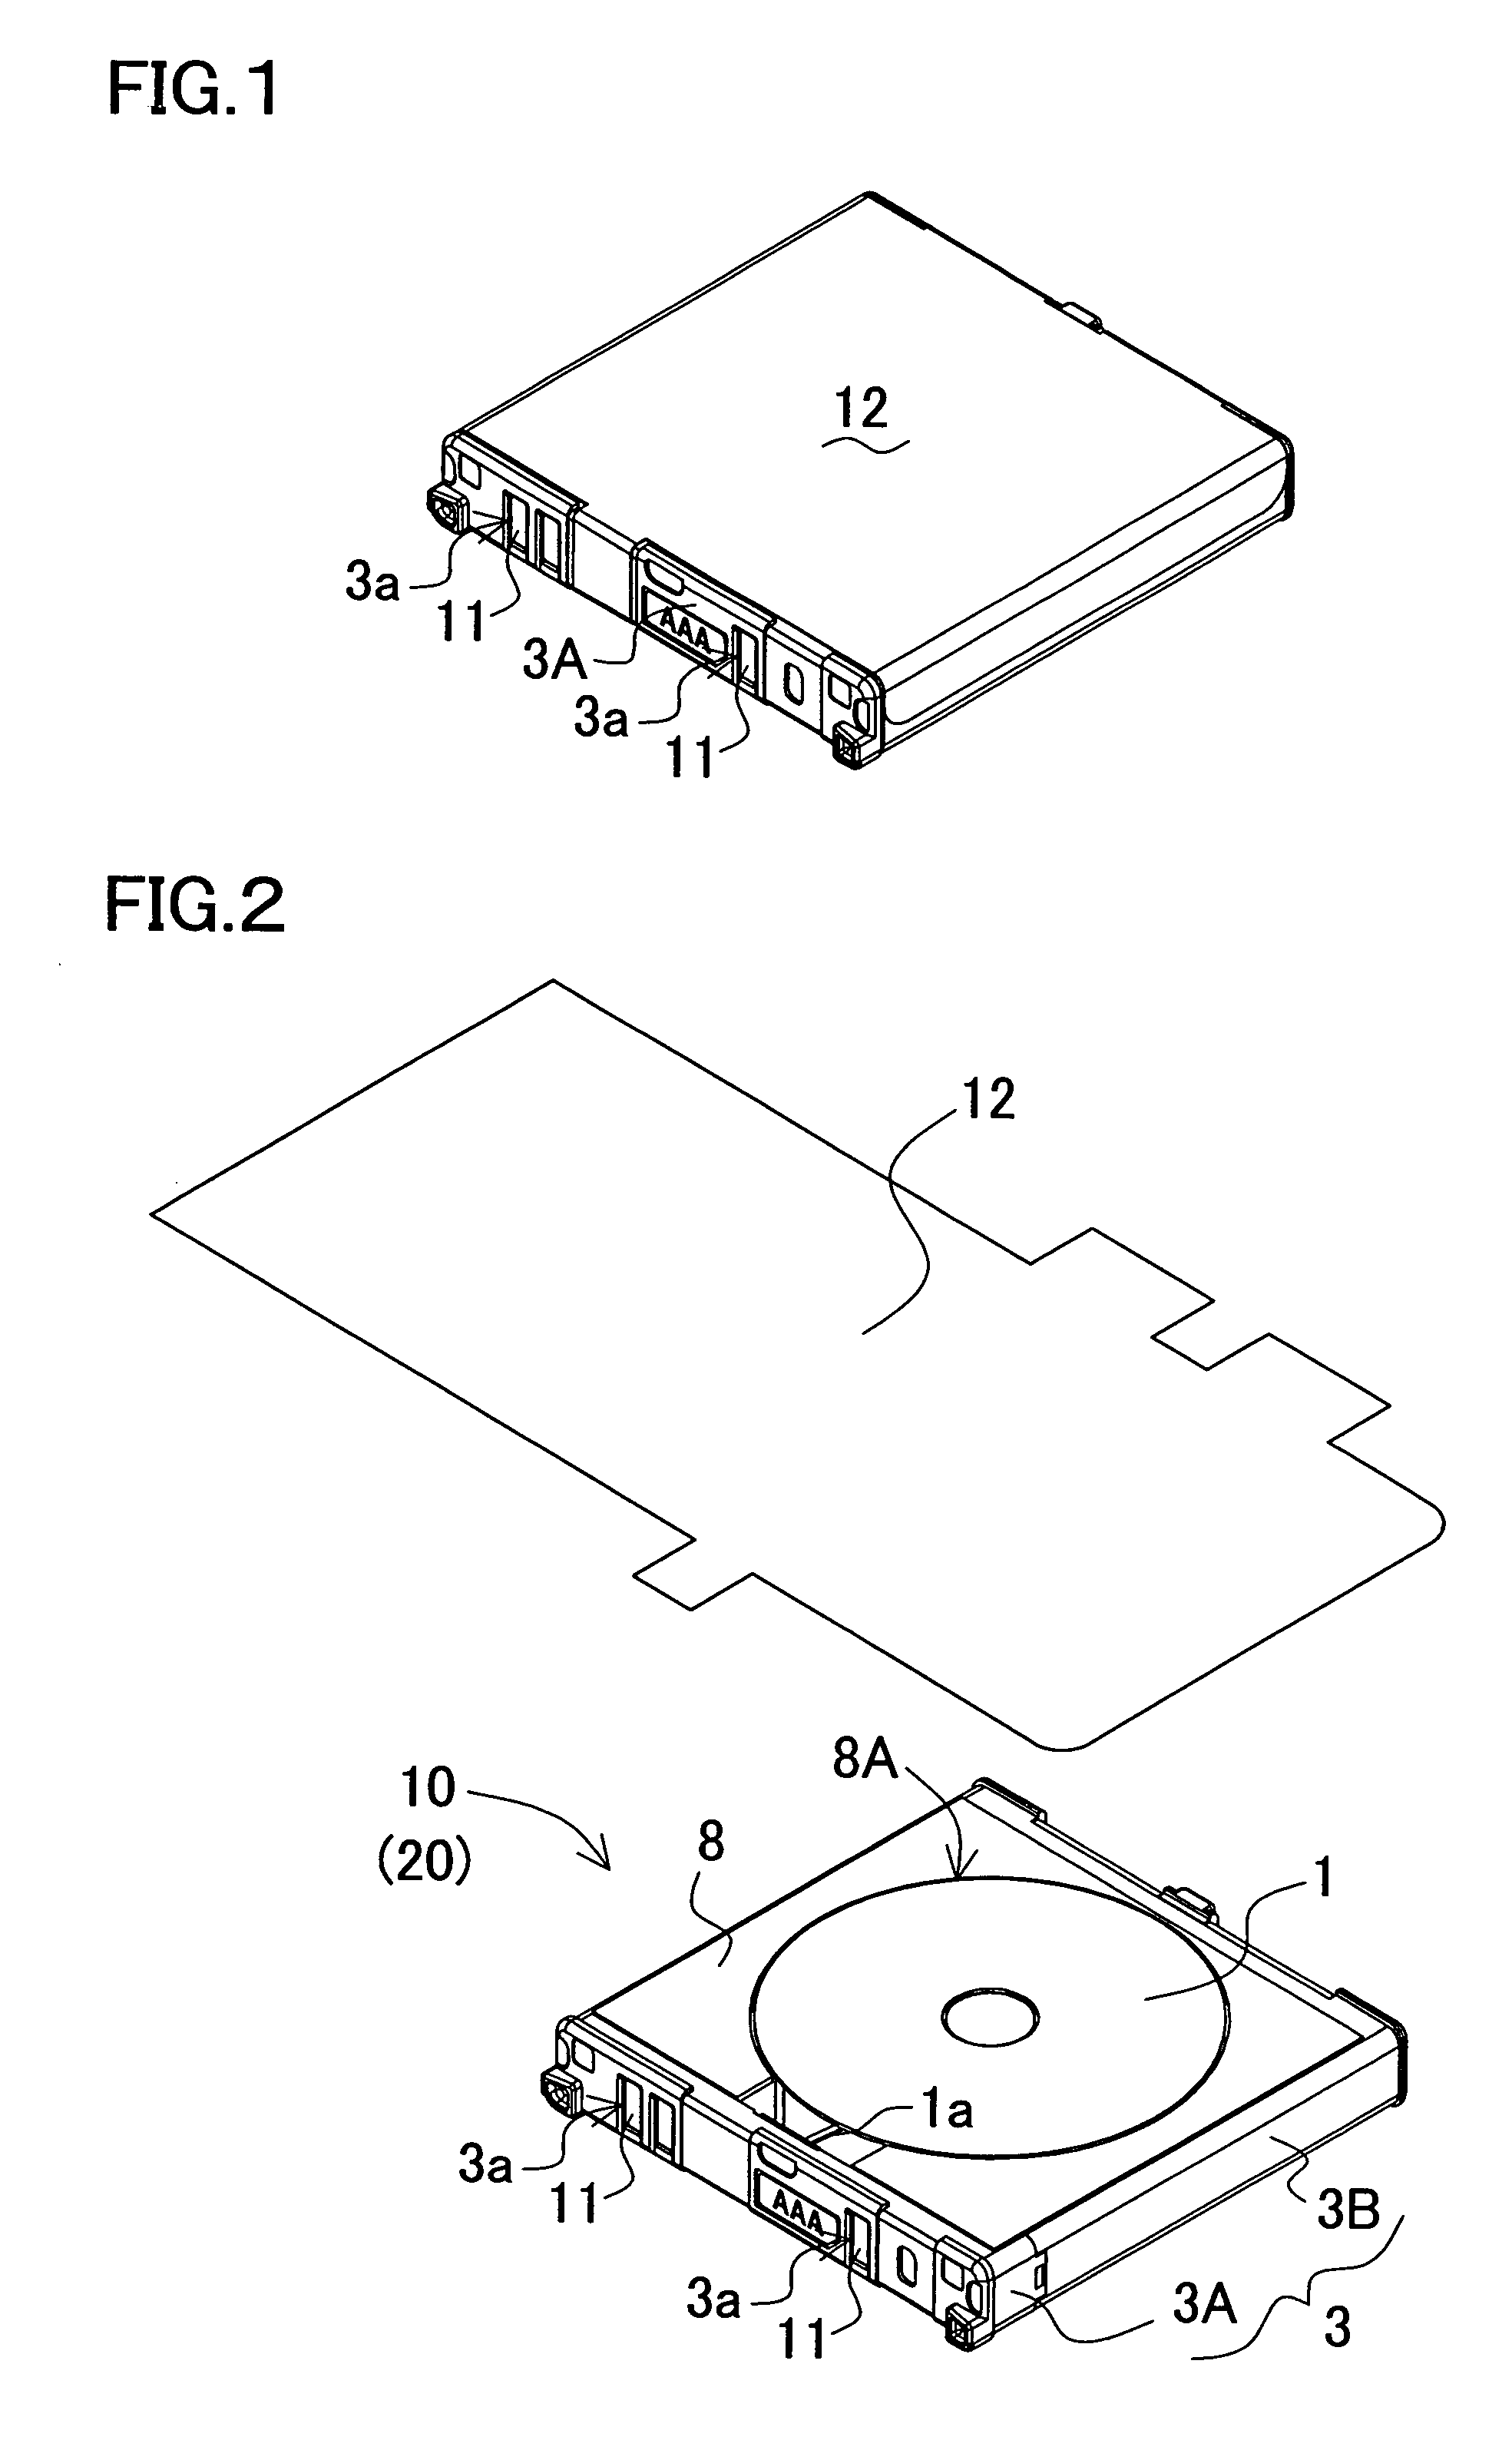 Battery pack with a secondary coil electromagnetically rechargeable by magnetic induction effect